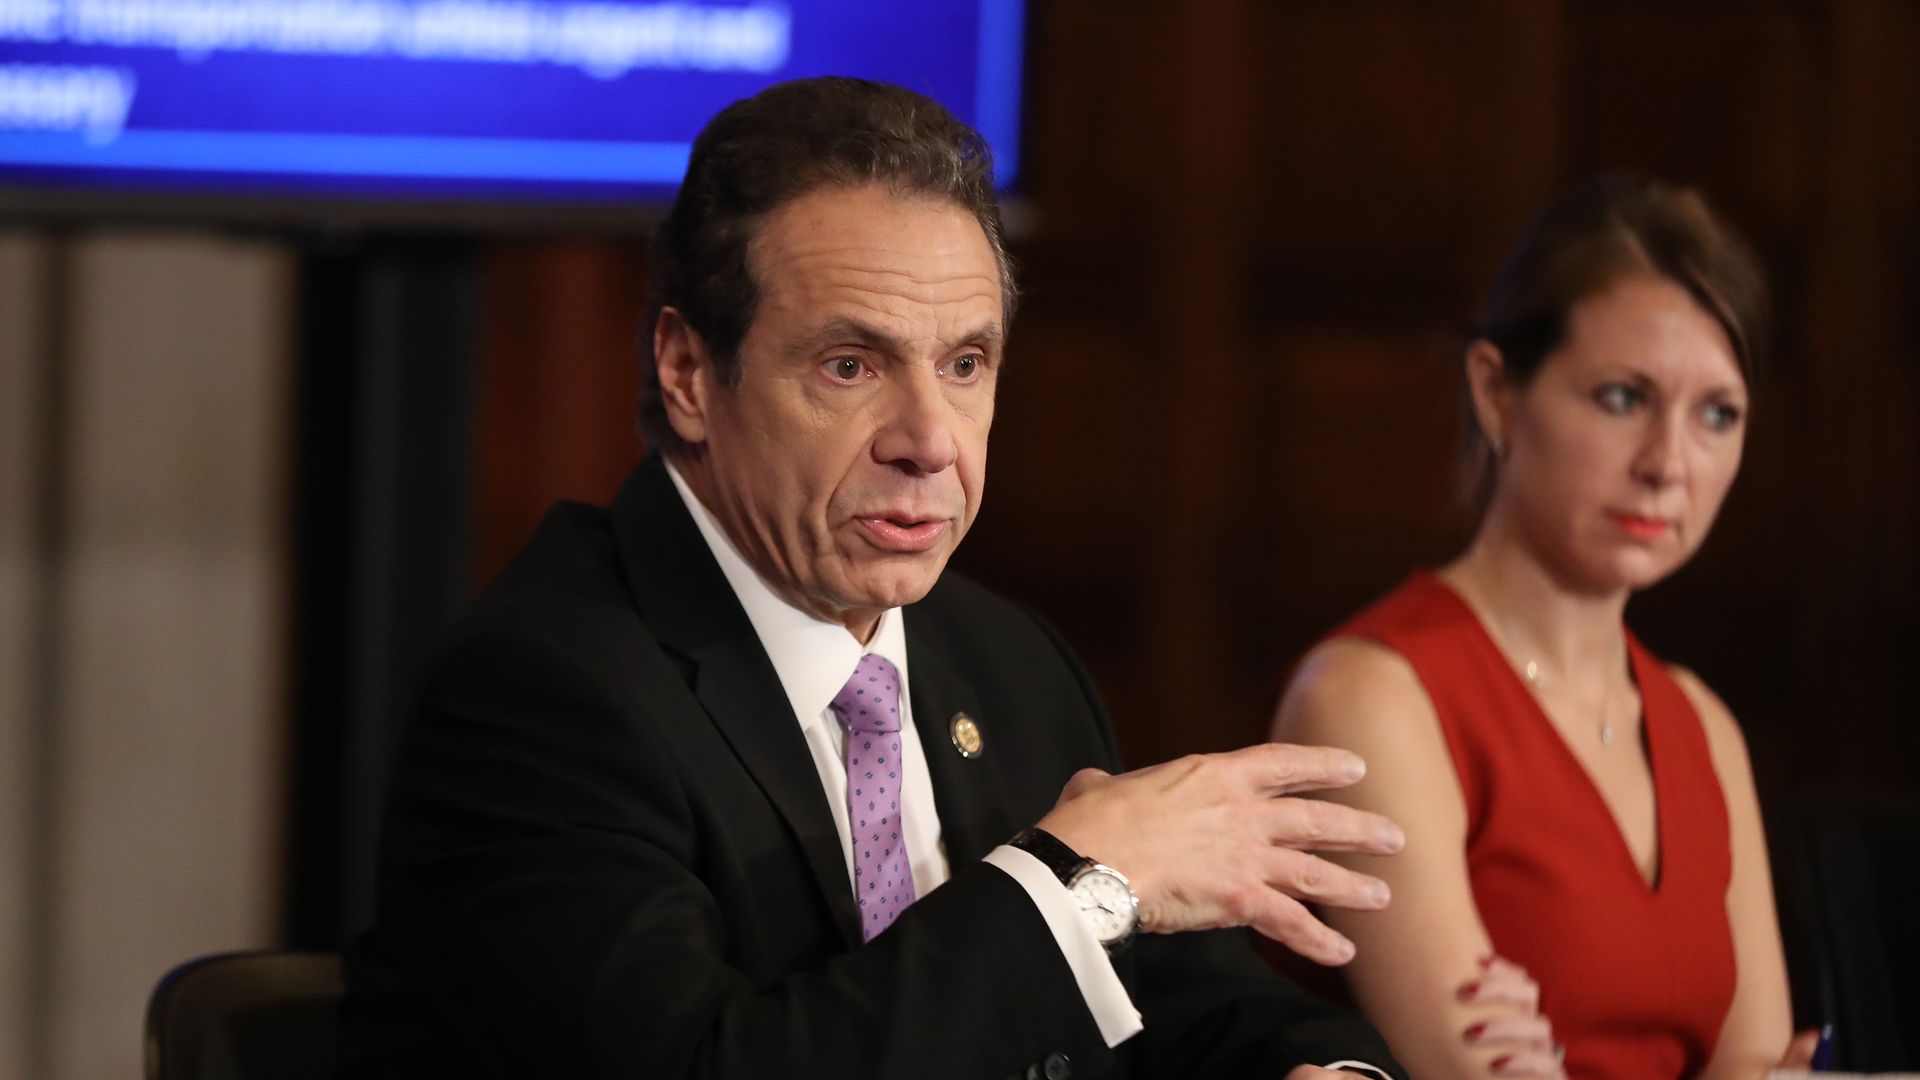 New York Governor Andrew Cuomo (L) speaks during his daily news conference with Secretary to the Governor Melissa DeRosa (R) on March 20, 2020 in New York City